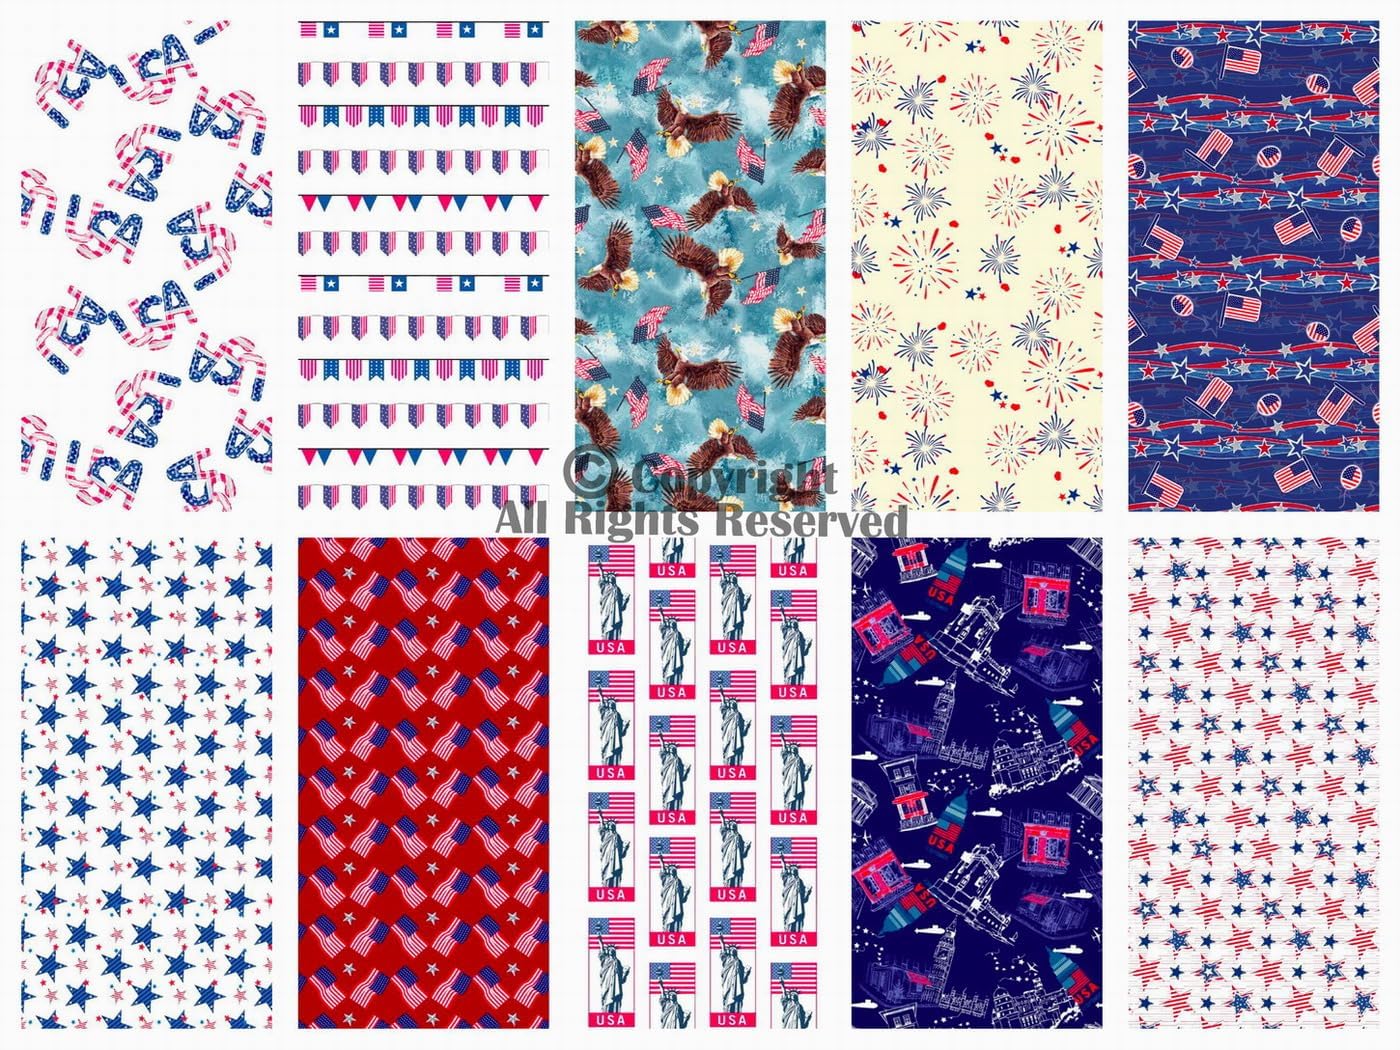 Craftido-19 Options-100% Cotton Fabric by The Yard in Solid Color 44”Wide  by 3yd (9 ft) -Medium Weight 5.2 oz- for Quilting, Sewing, Crafts, Binding